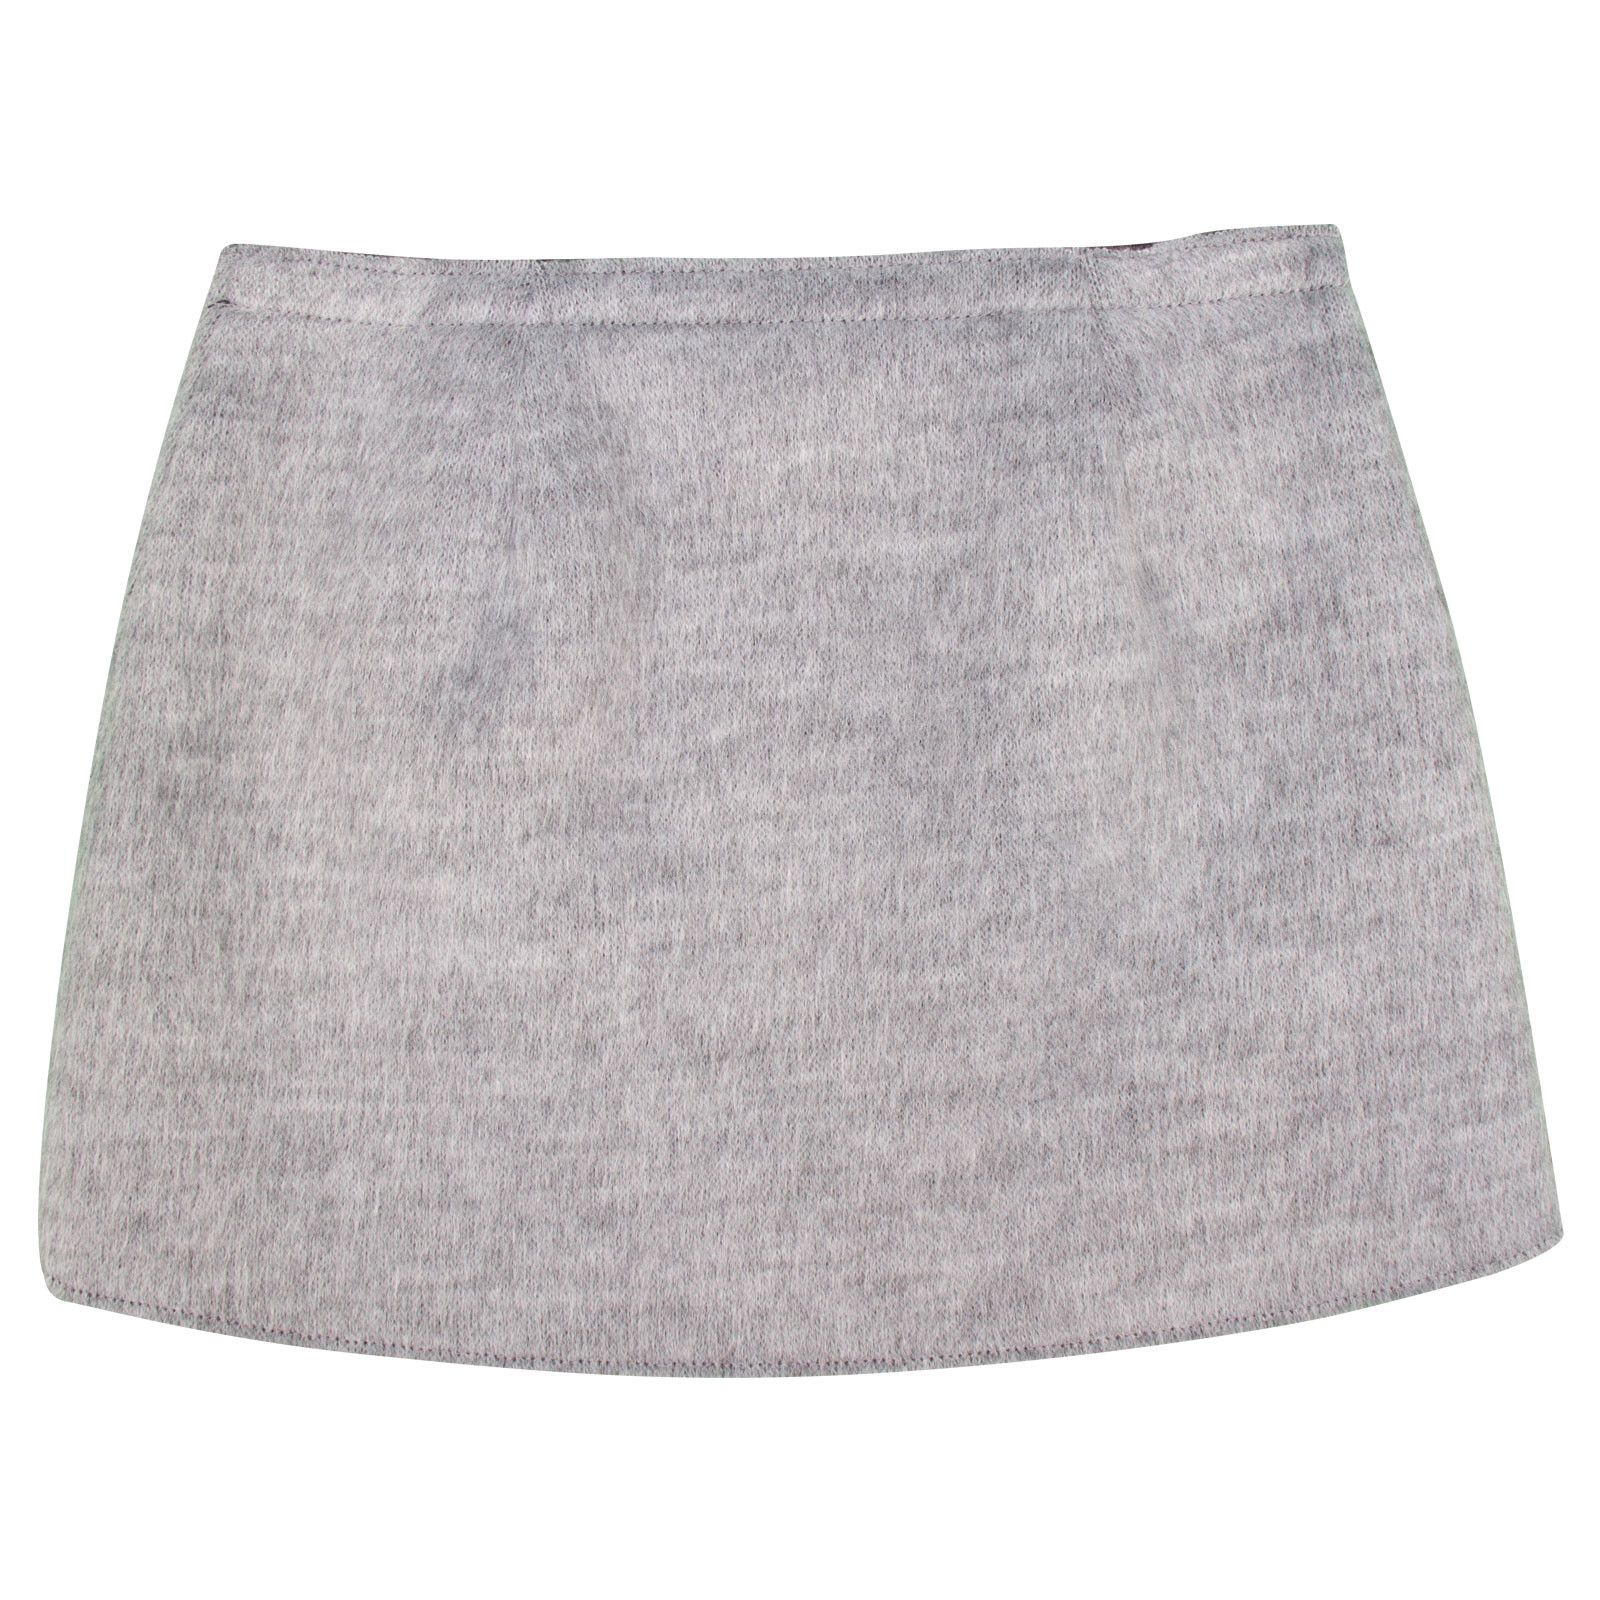 Girls Grey Pasted Synthetic Fur Acrylic Skirt - CÉMAROSE | Children's Fashion Store - 3